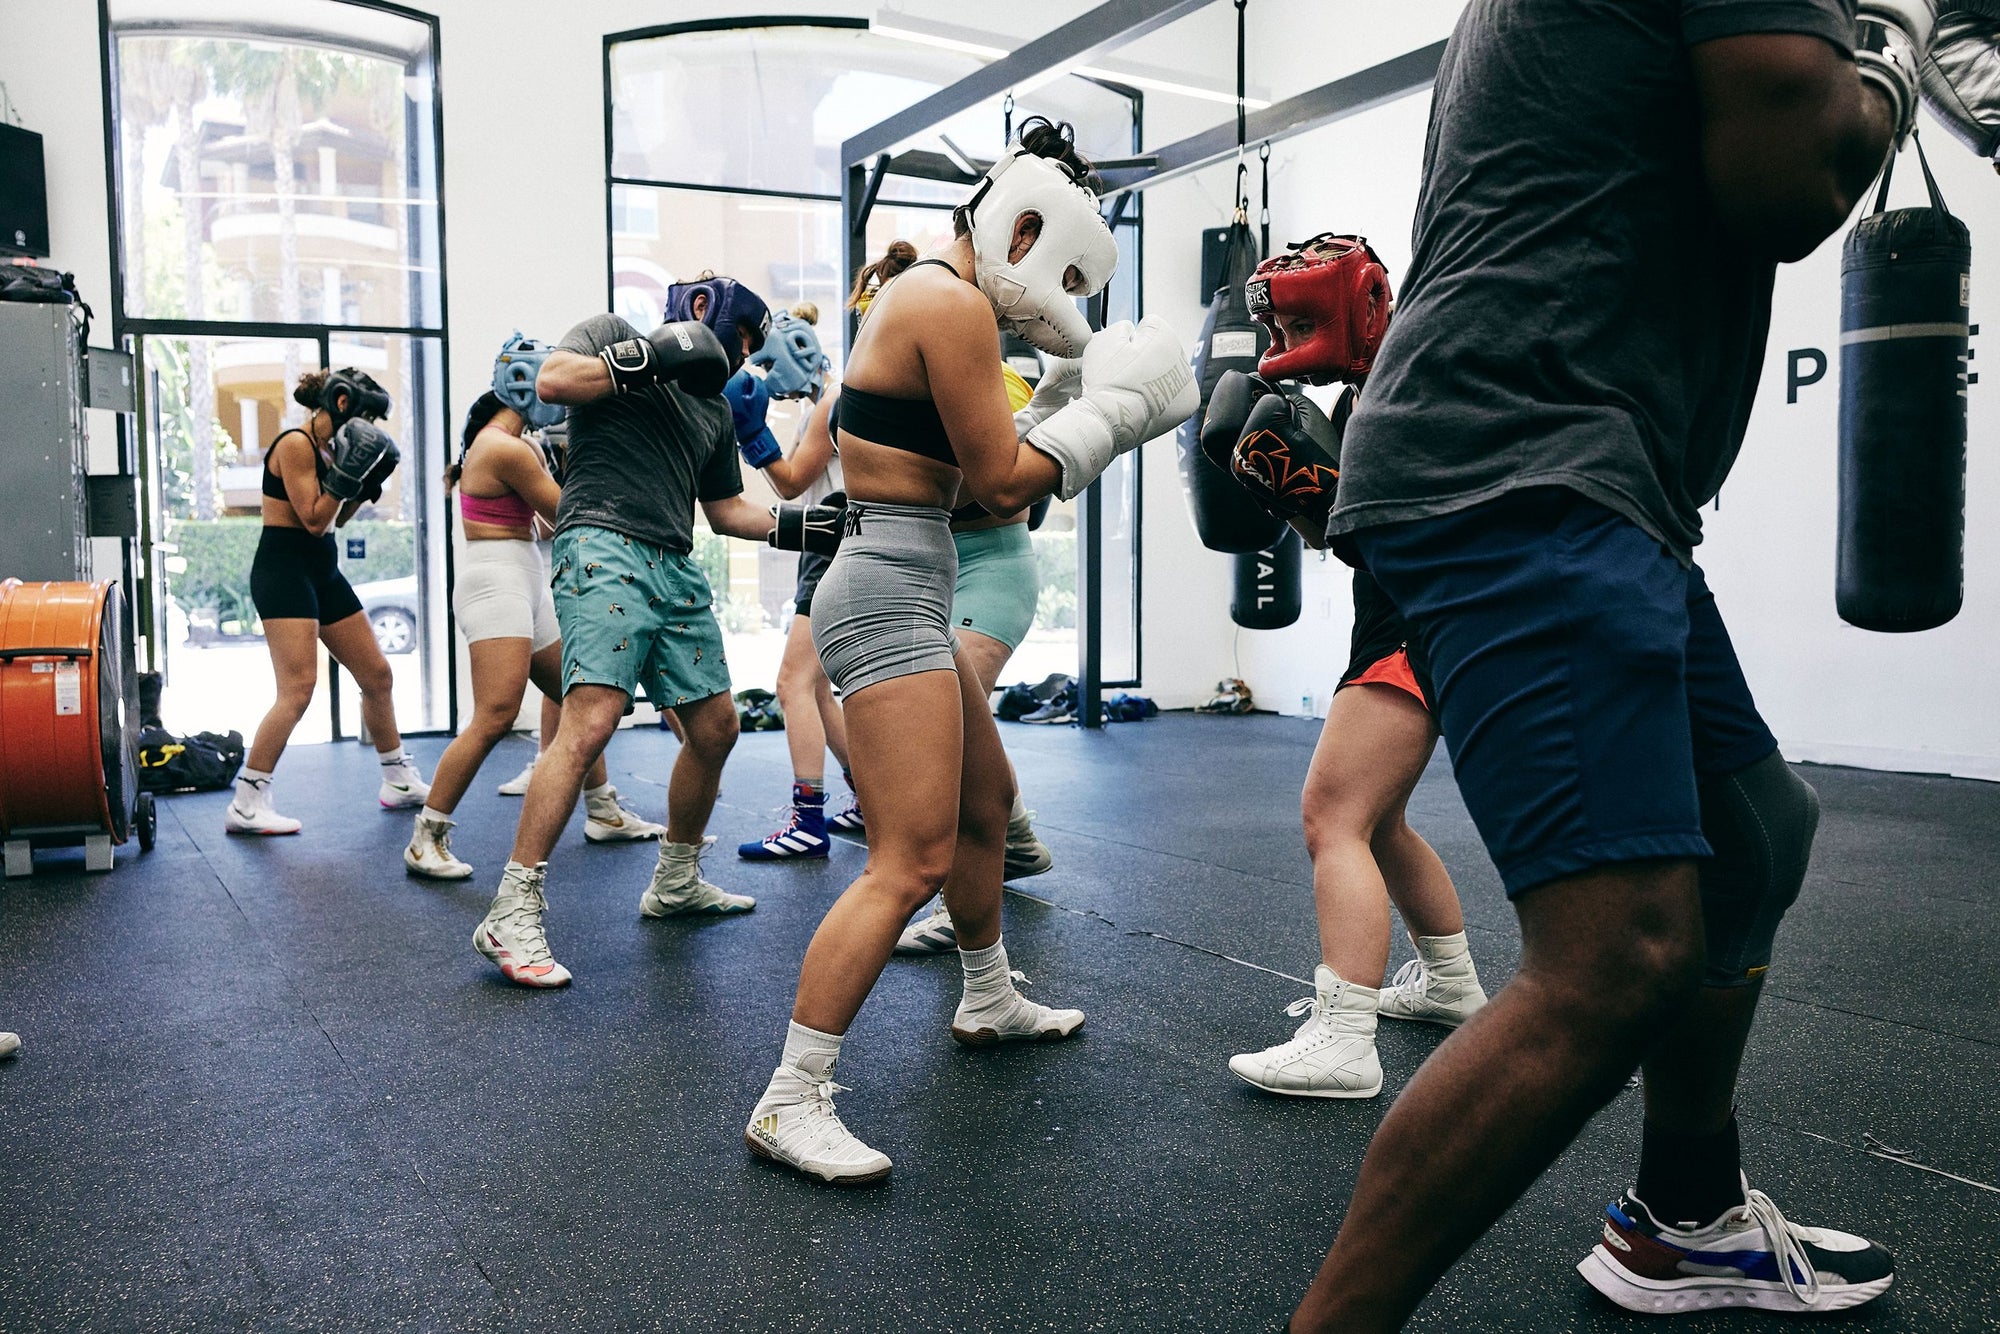 Jumping into the Ring: Do You Need Experience to Take a Boxing Class?